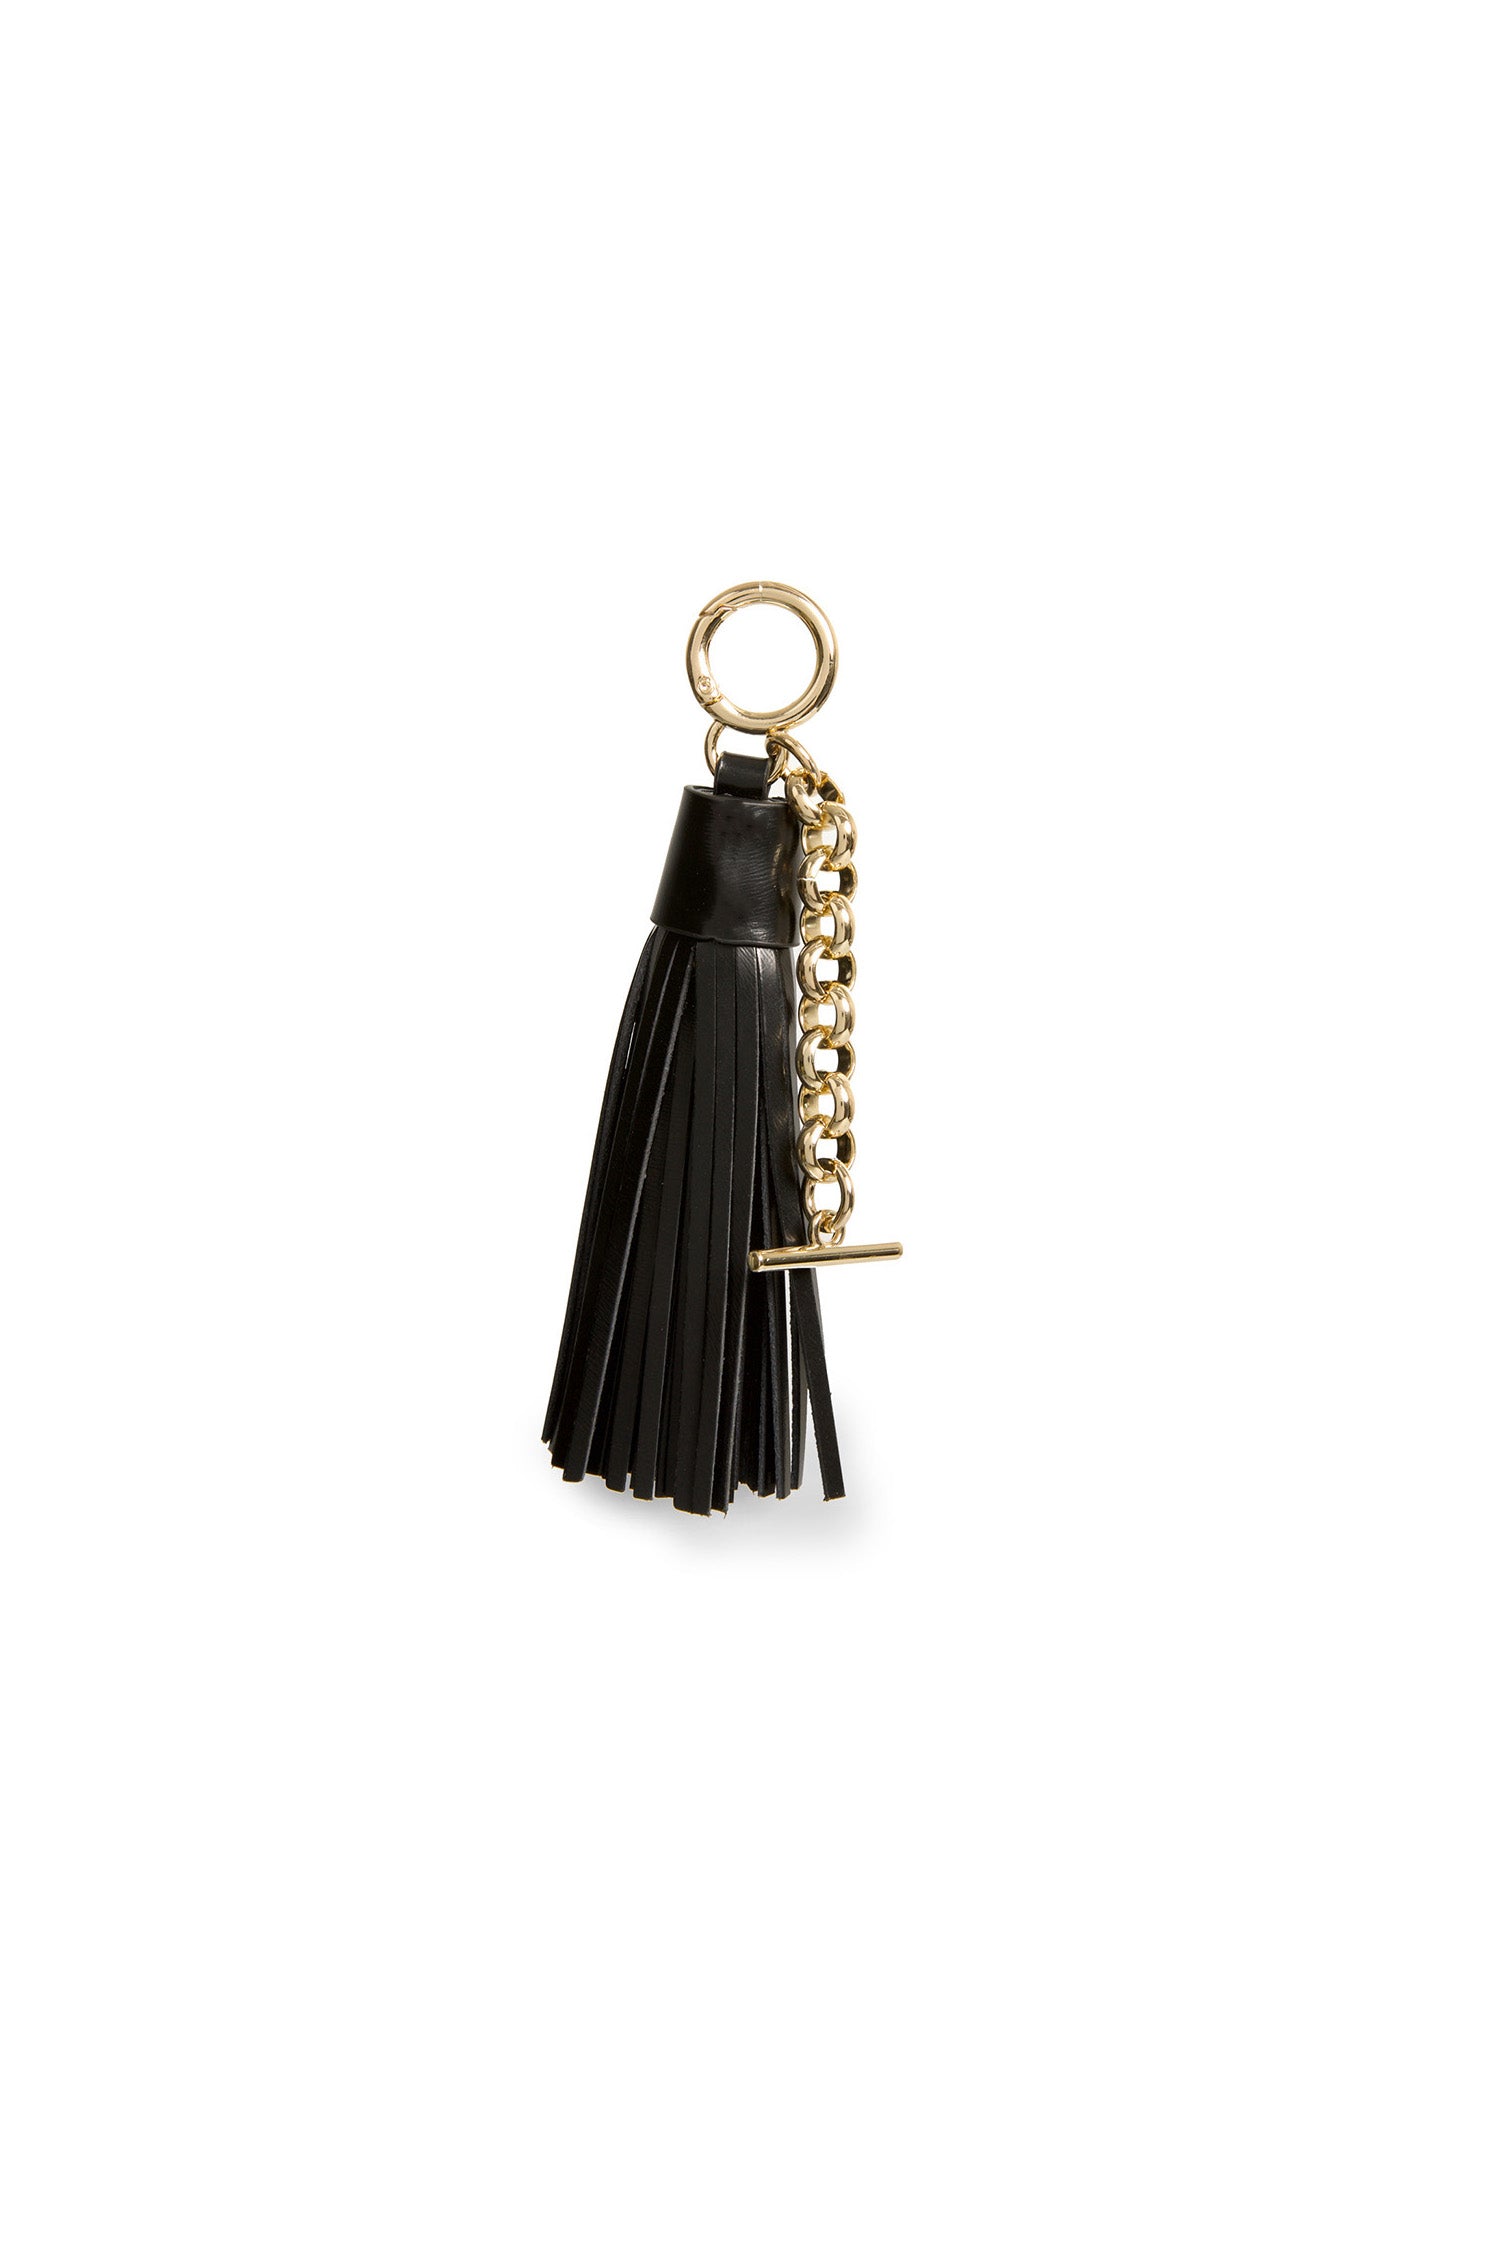 SAMPLE - The Harlow Lux Keychain Black Light Gold